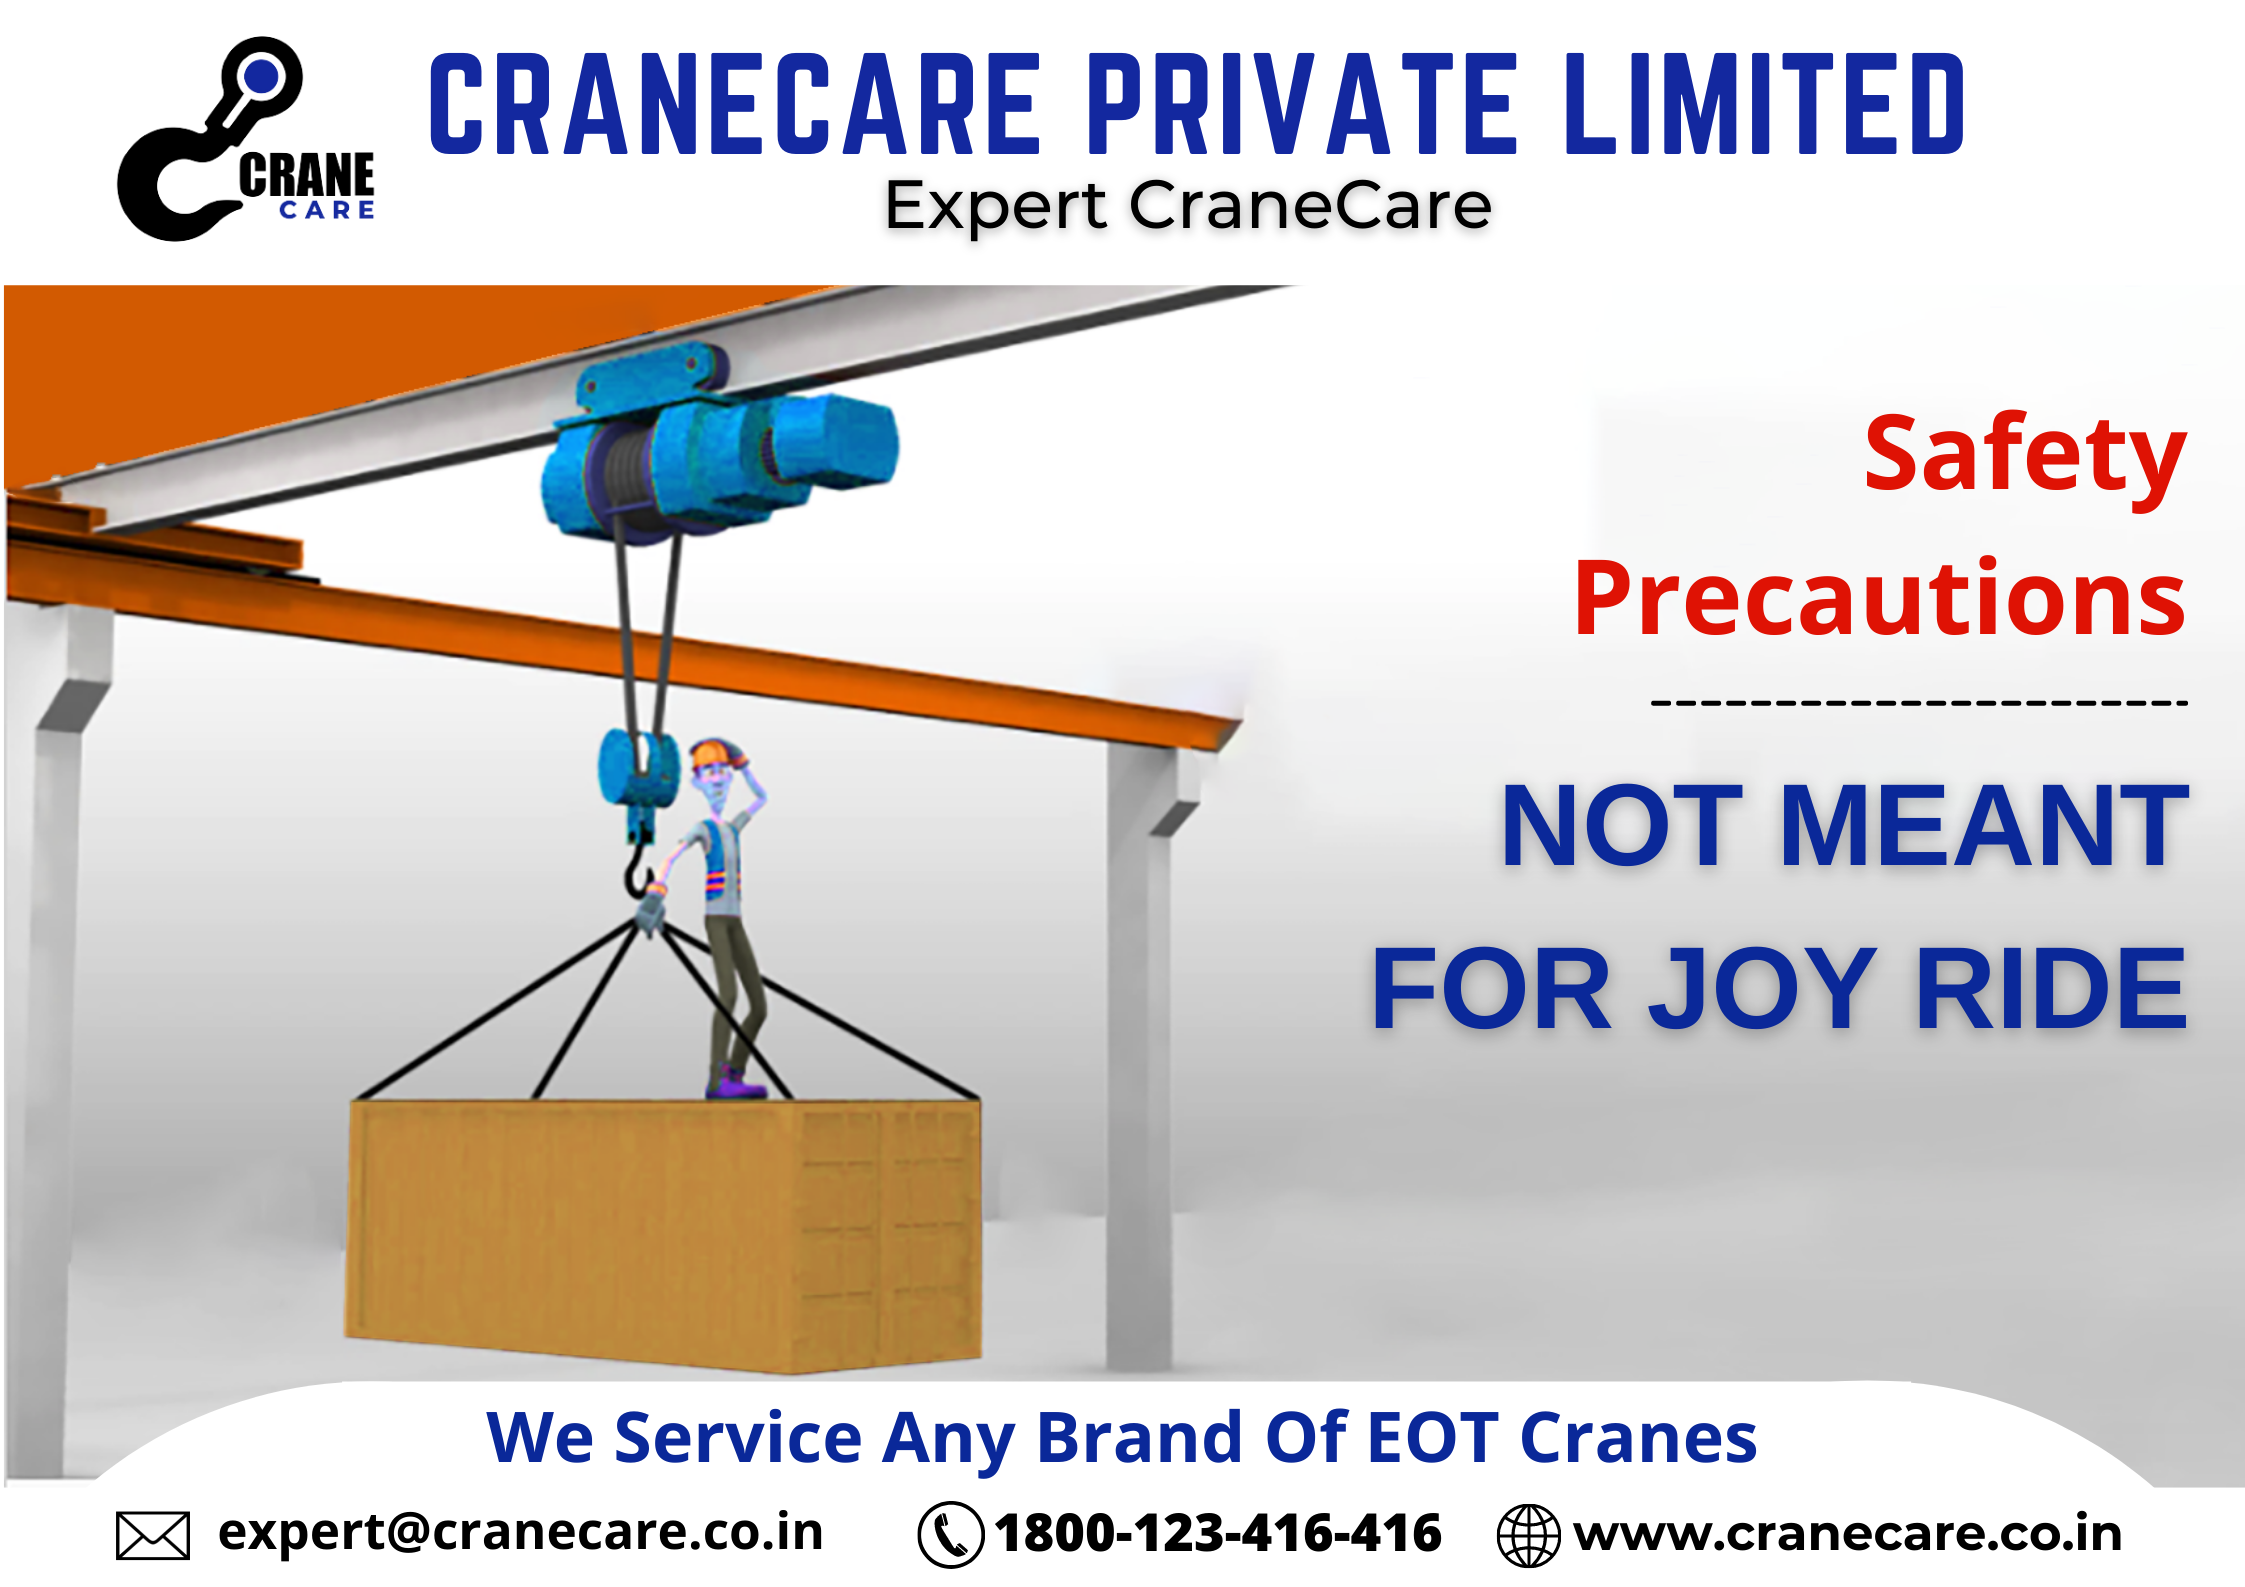 Safety Precautions For EOT Cranes